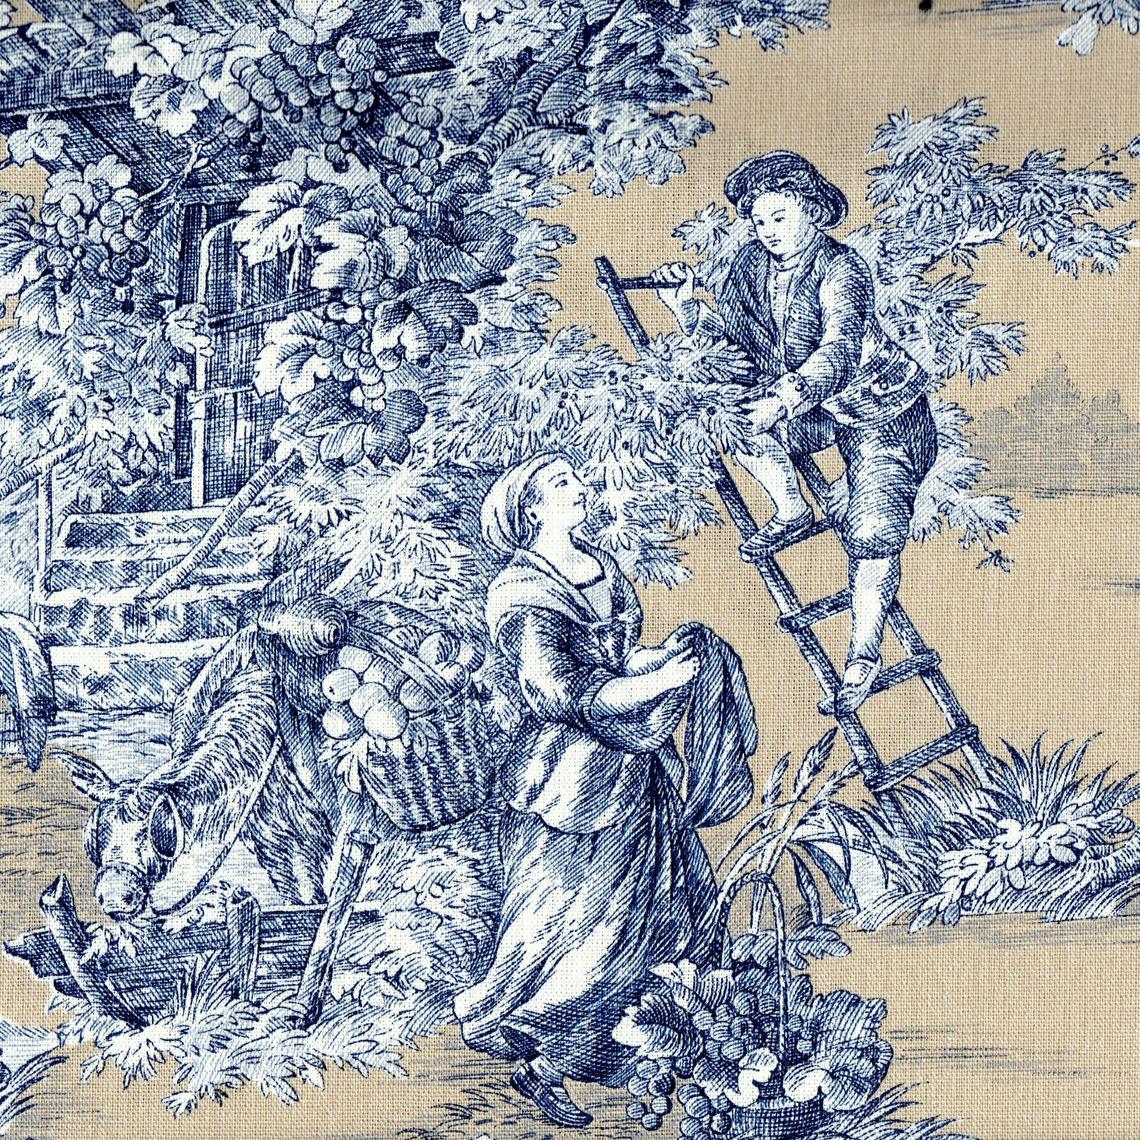 tailored bedskirt in pastorale #88 blue on beige french country toile